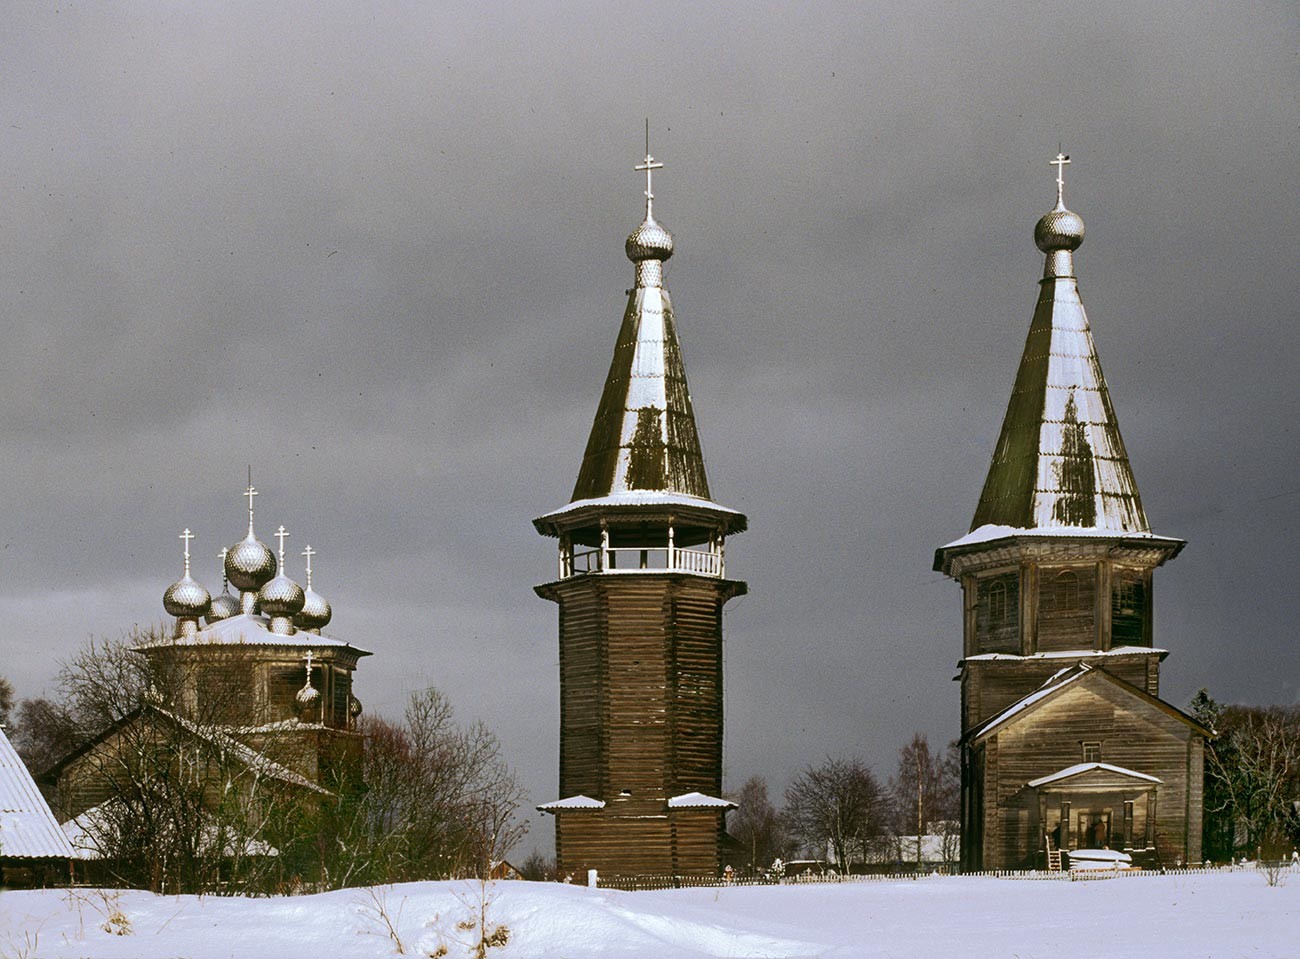 Lyadiny. From left: Epiphany Church, bell tower, Intercession Church. West view. (Bell tower & Intercession Church destroyed by fire, May 5, 2013.) February 28, 1998